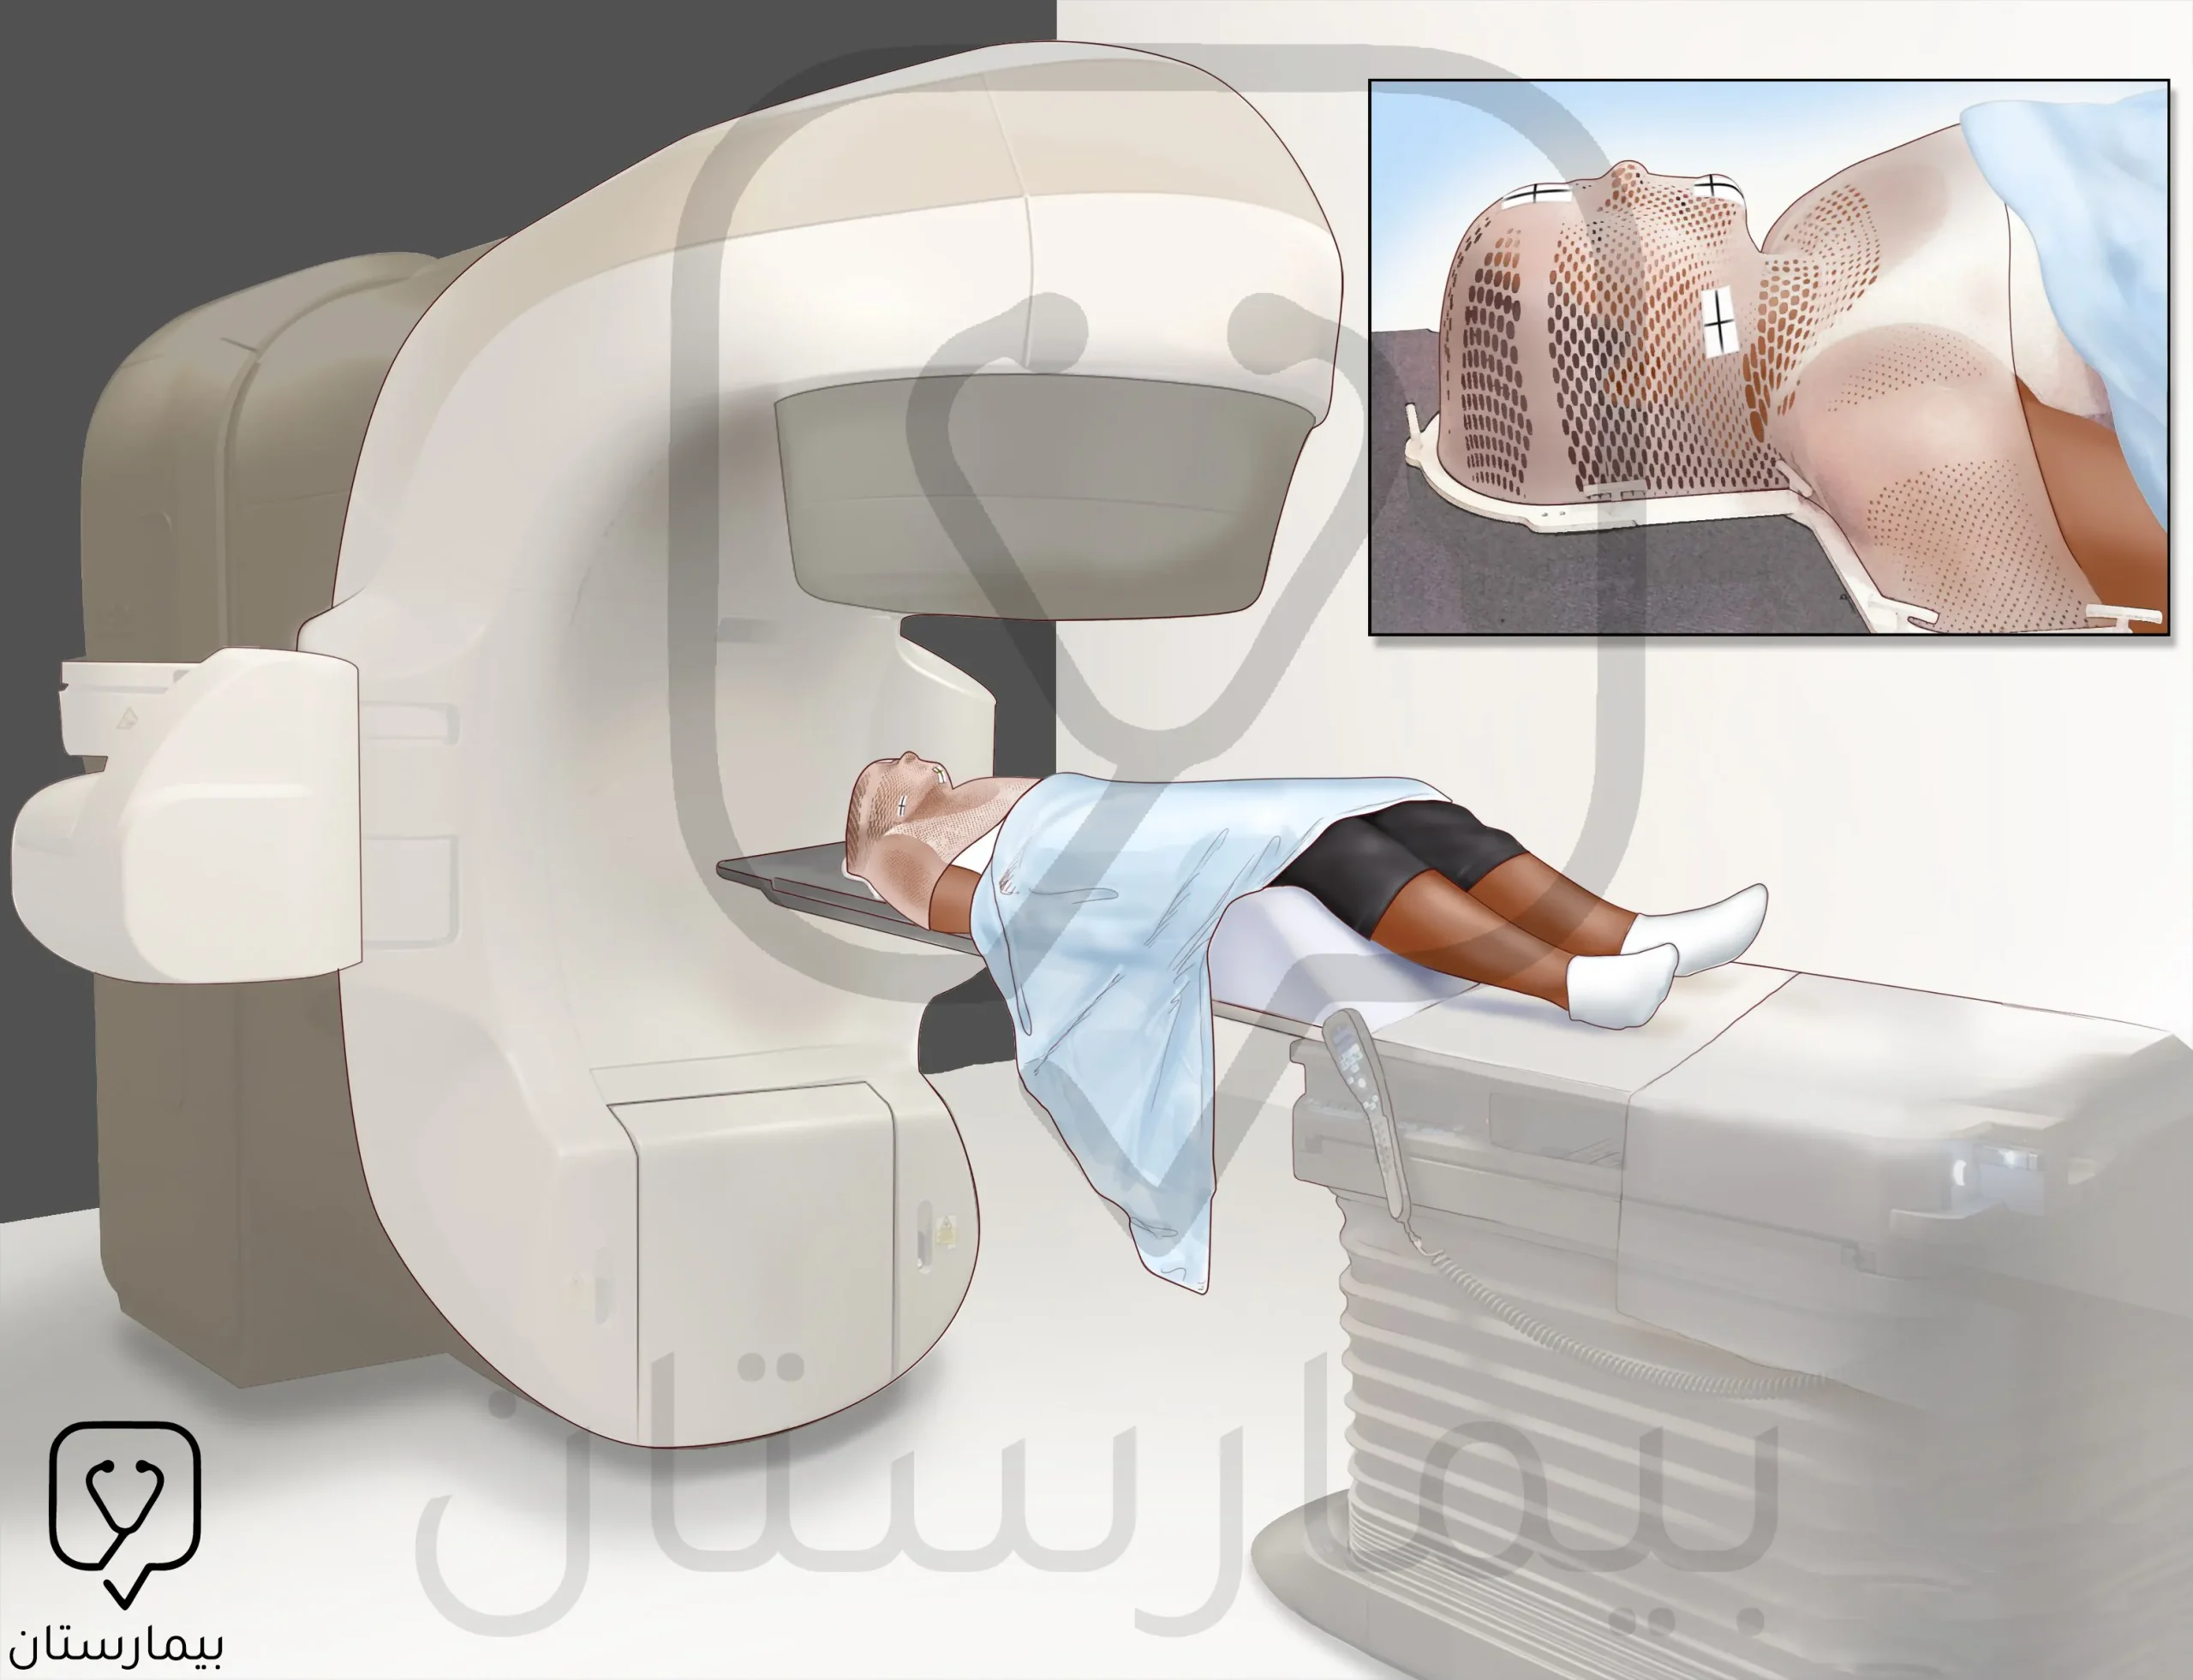 The patient lies down and a large device rotates around him and directs the beam of radiation towards the tumor